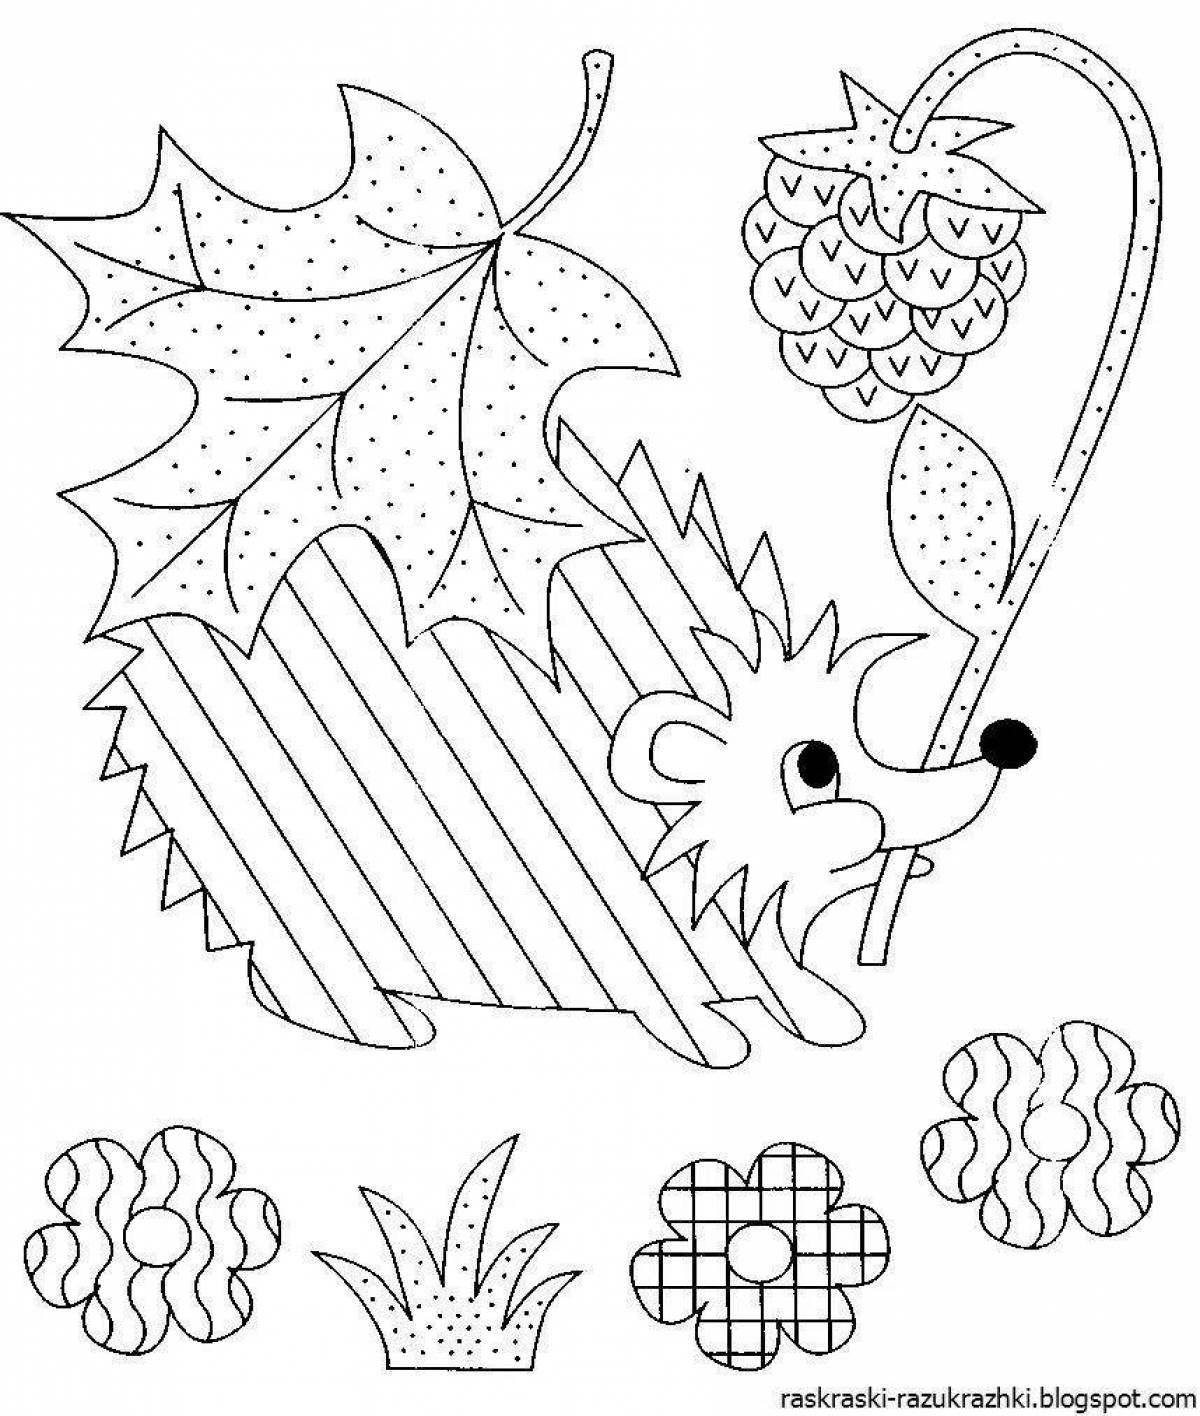 Coloring book for preschoolers with challenging tasks